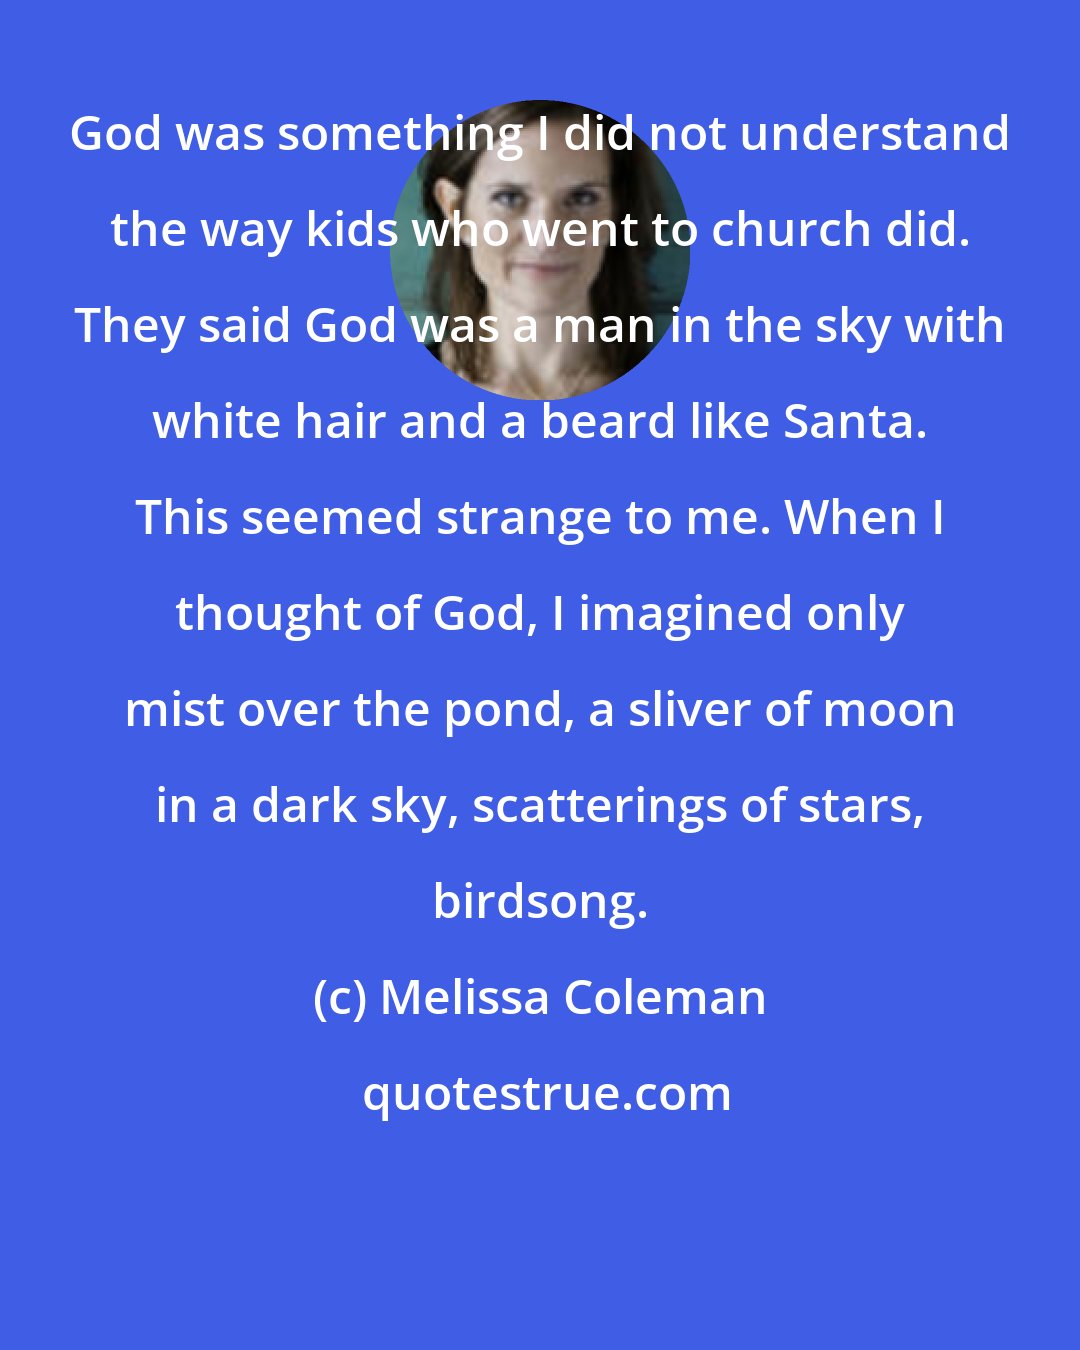 Melissa Coleman: God was something I did not understand the way kids who went to church did. They said God was a man in the sky with white hair and a beard like Santa. This seemed strange to me. When I thought of God, I imagined only mist over the pond, a sliver of moon in a dark sky, scatterings of stars, birdsong.